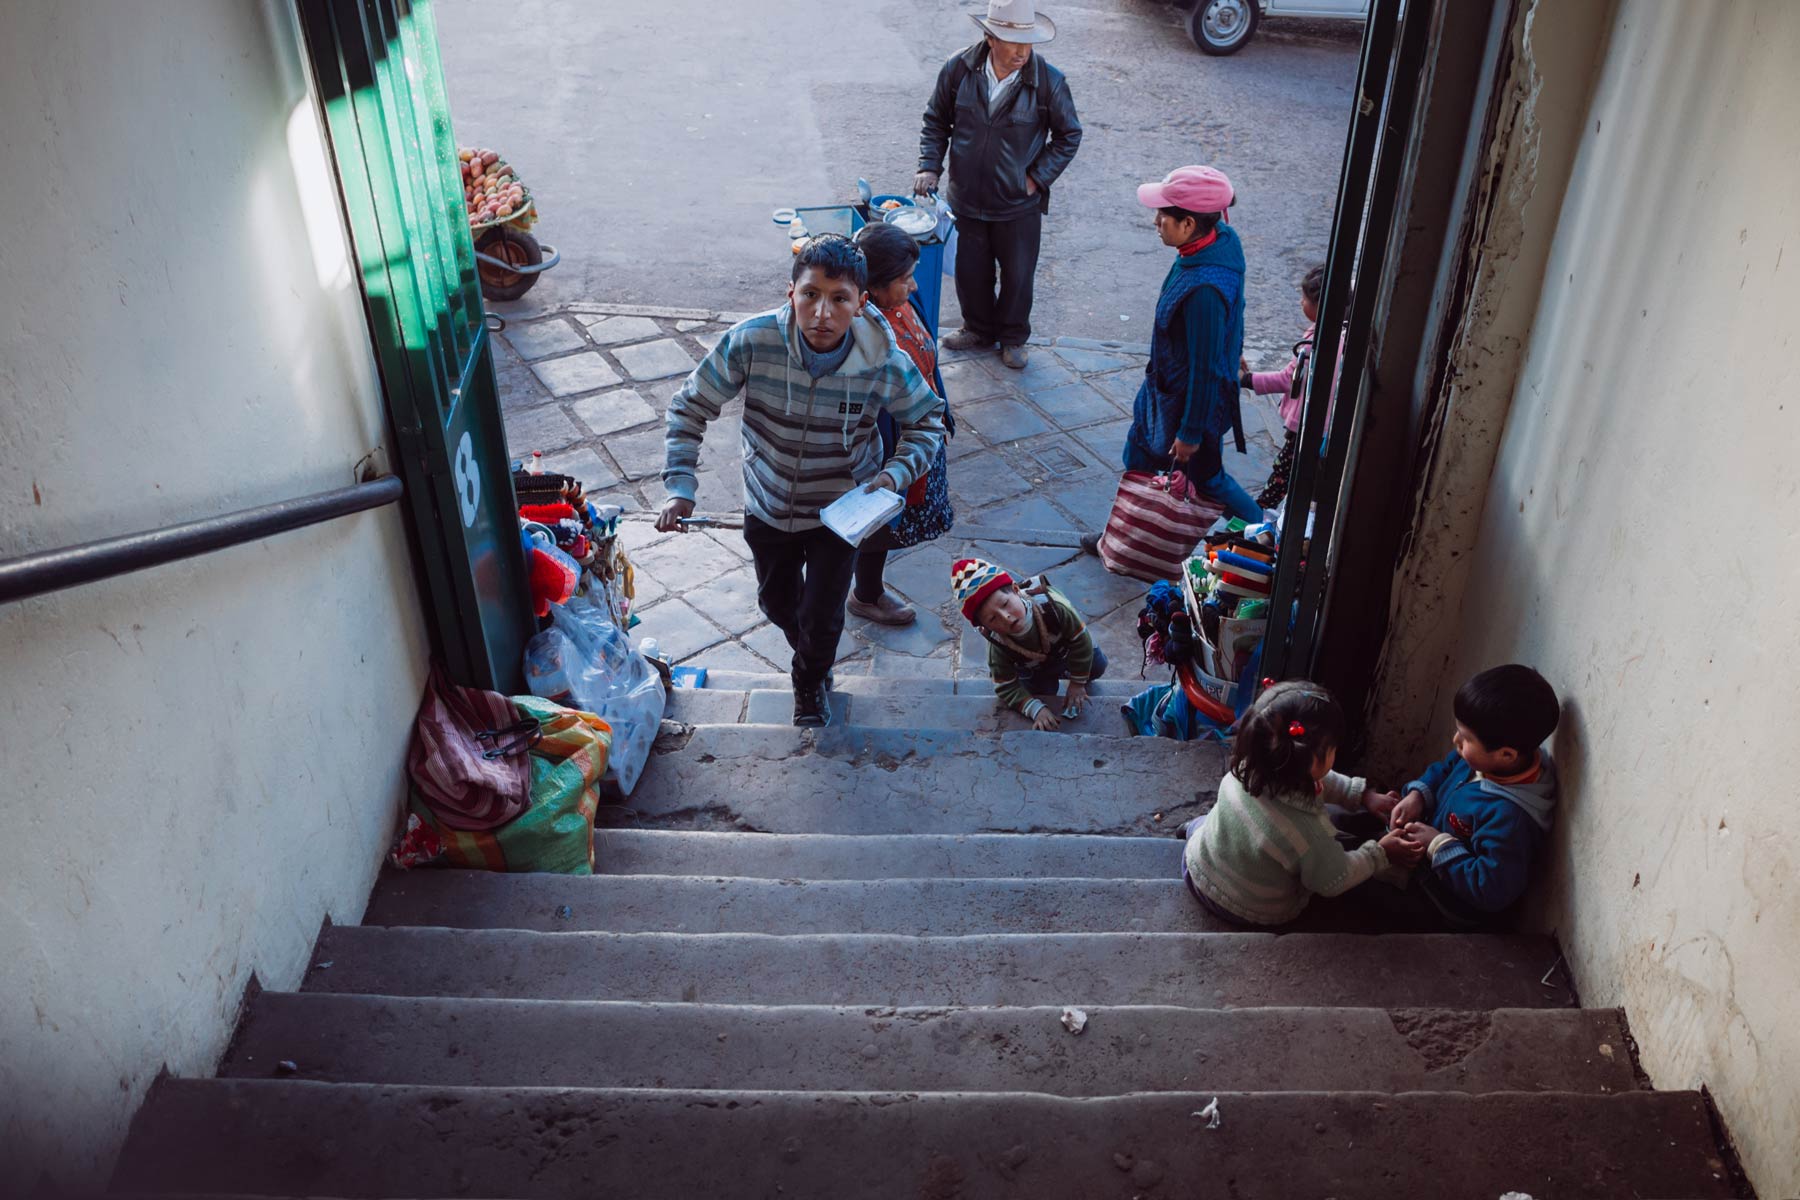 A young boy quickly ascends the steps of a local meat market in Cusco.